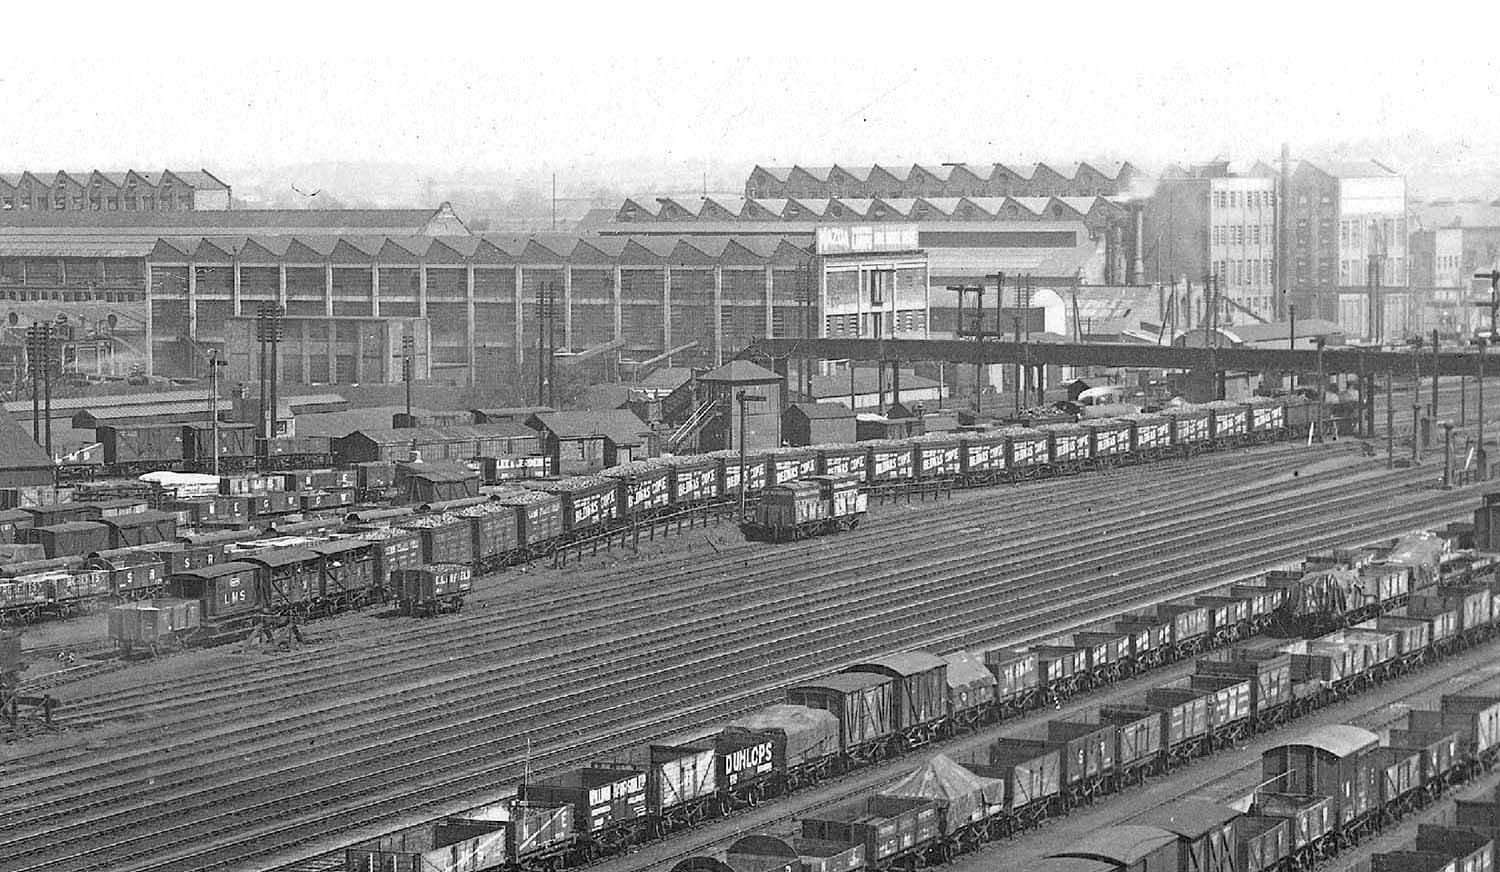 Close up showing Rugby's shunting hump in its entirety and the unusual formation of the Bedwas Coke train which occupied it